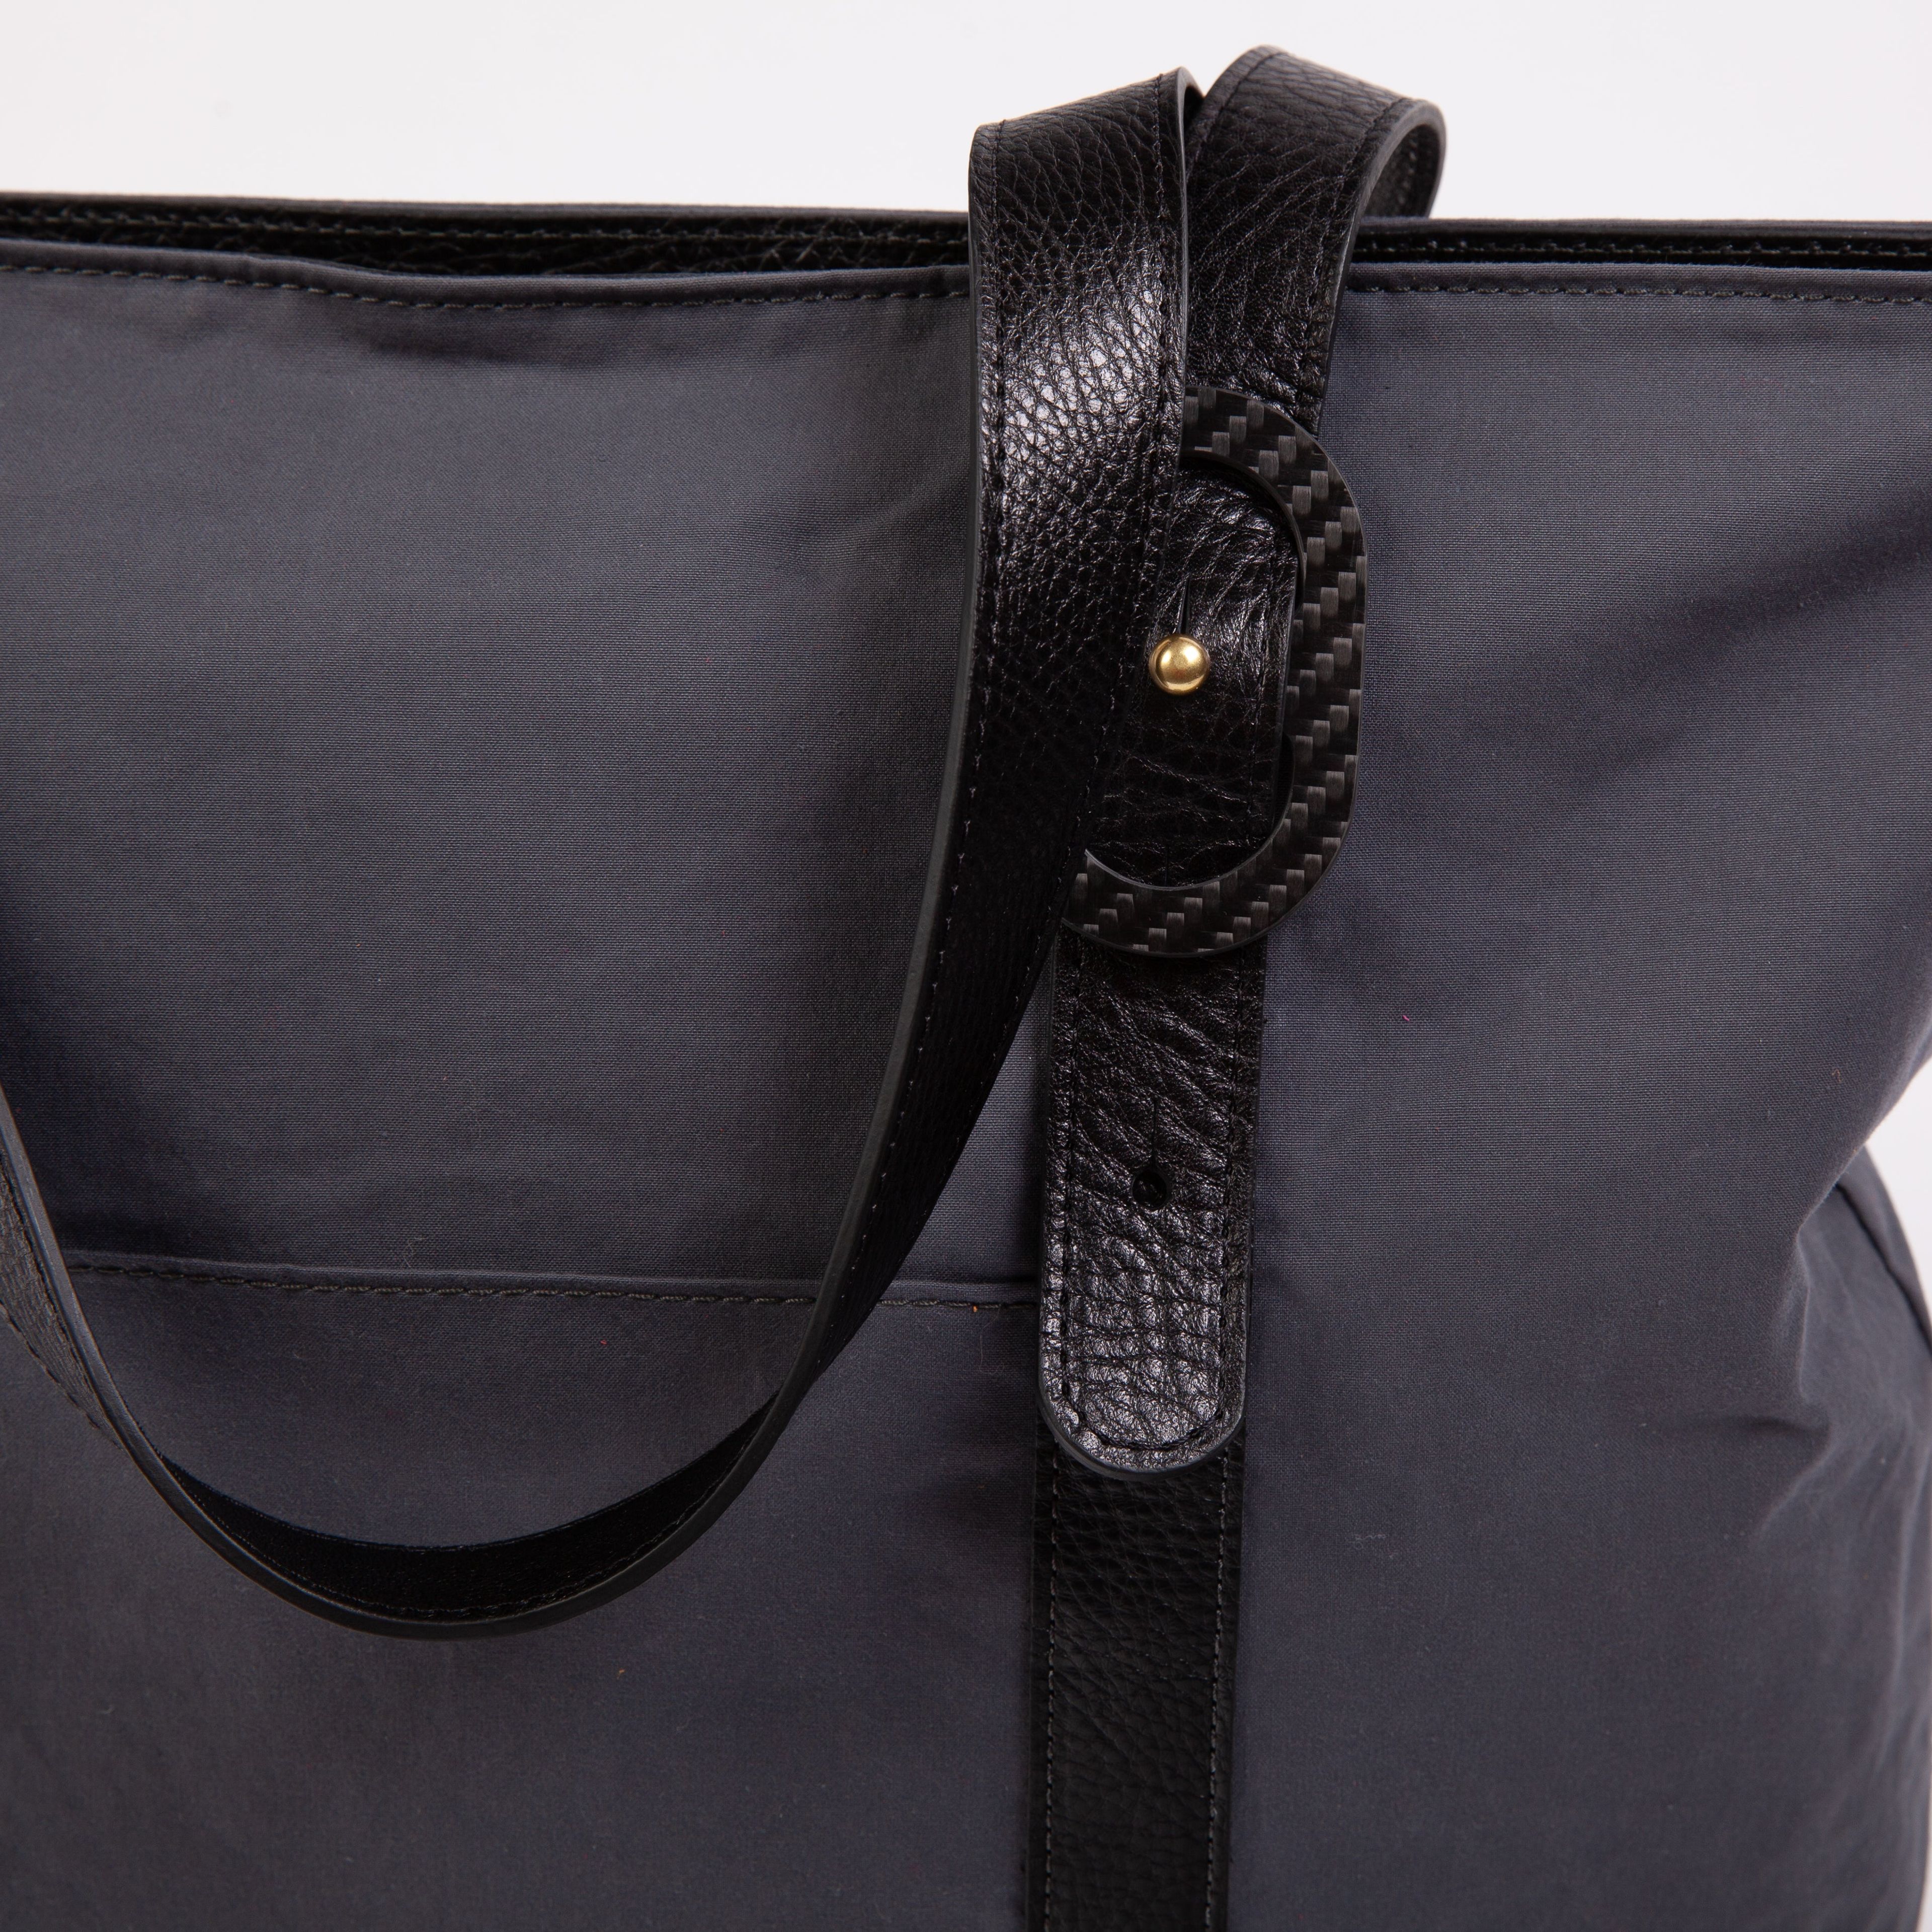 Monica Travel Tote in Waxed Cotton and Leather